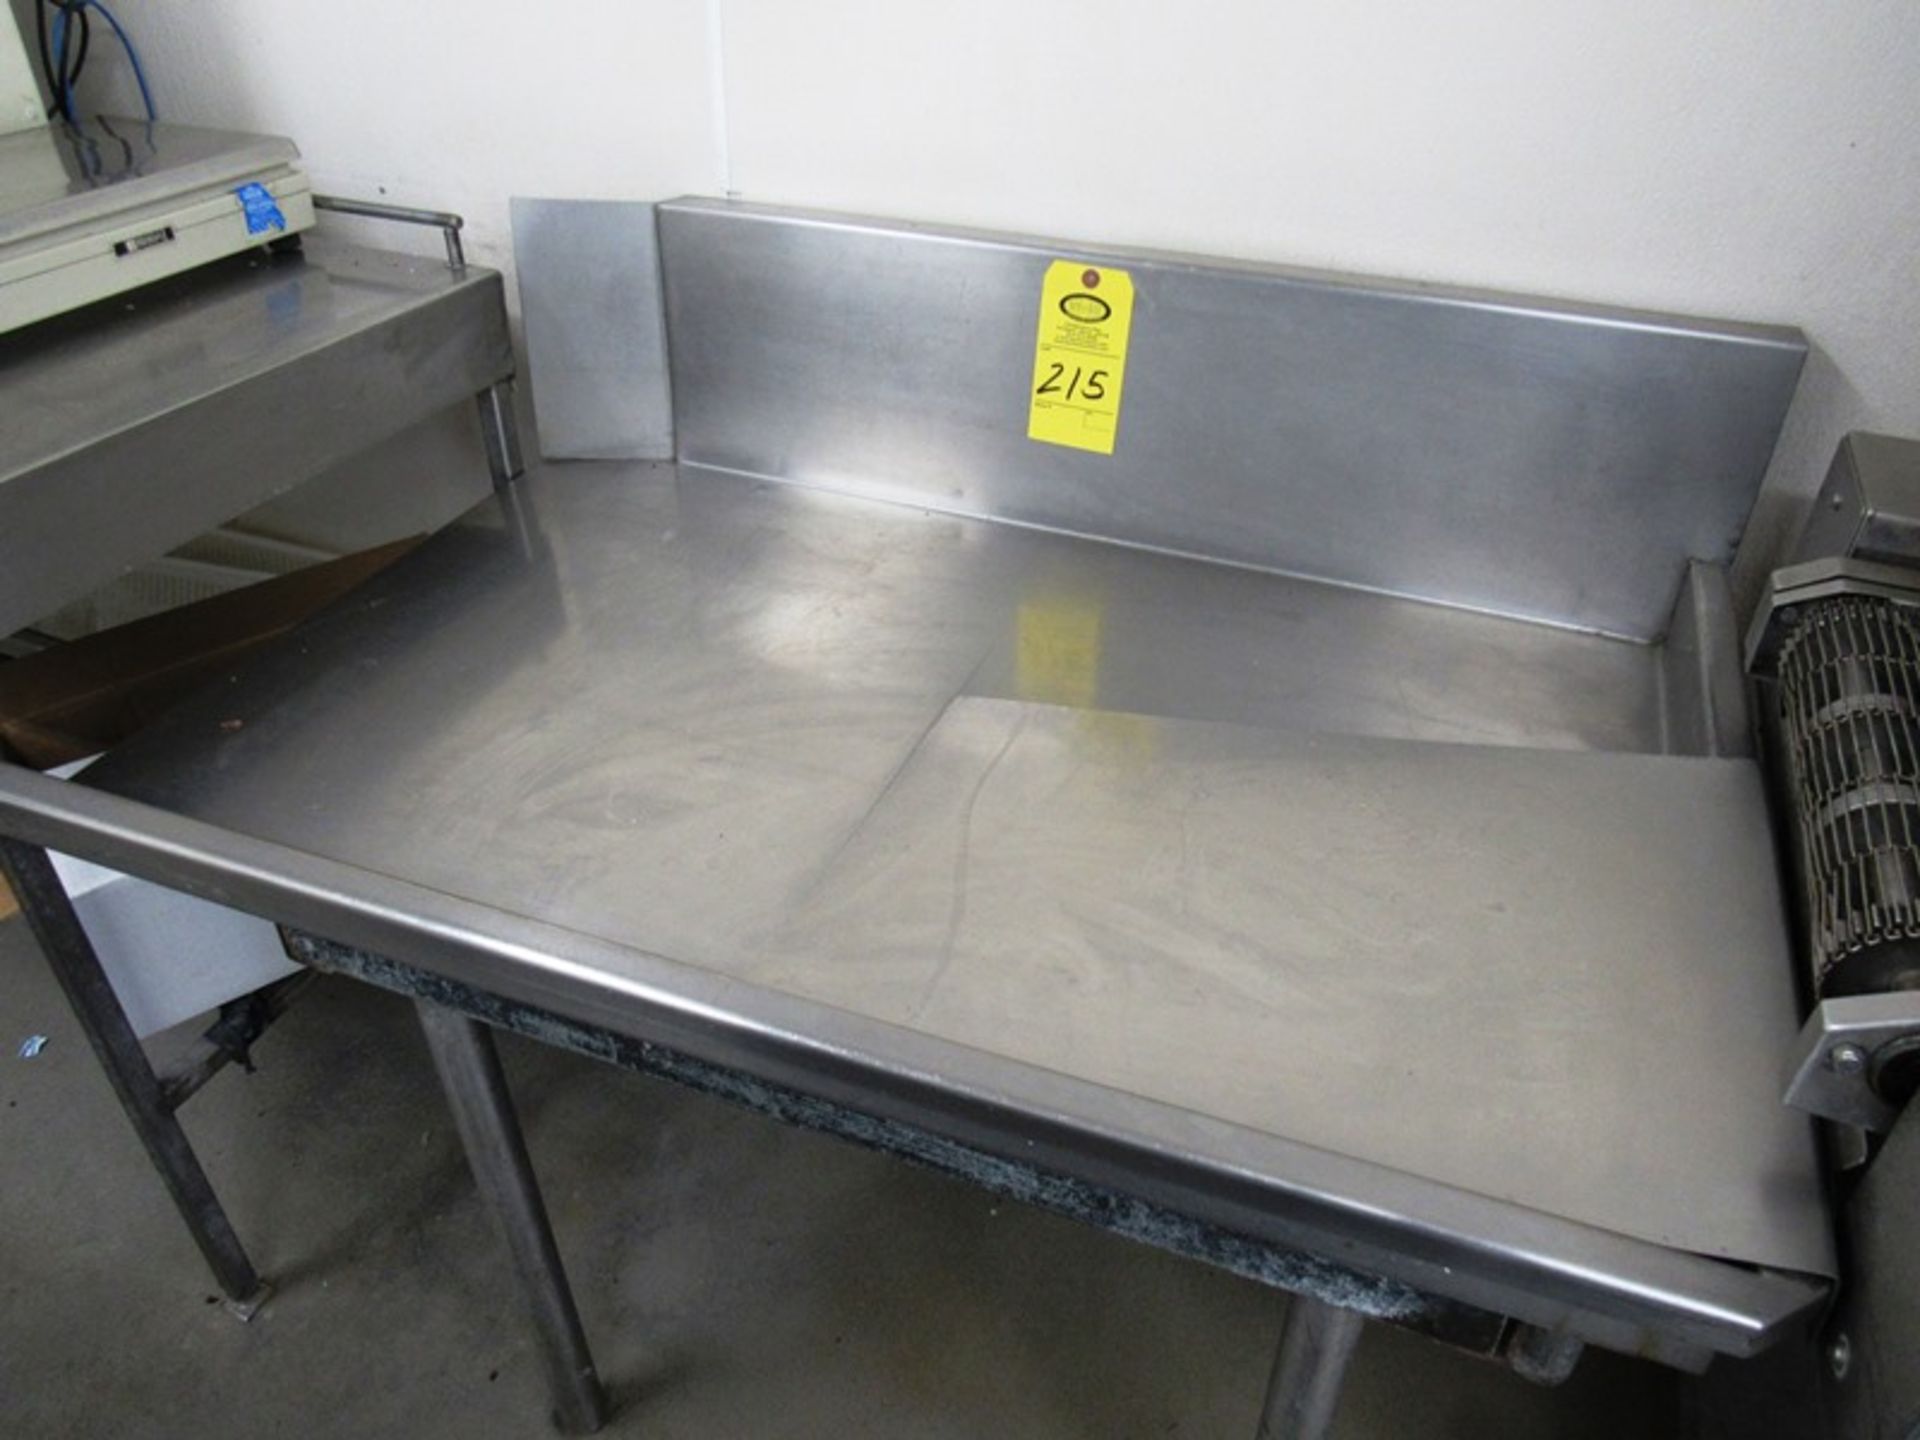 43" x 30" Stainless Steel Top Table W/Backsplash 2 Sides(All Funds Must Be Received by Friday,